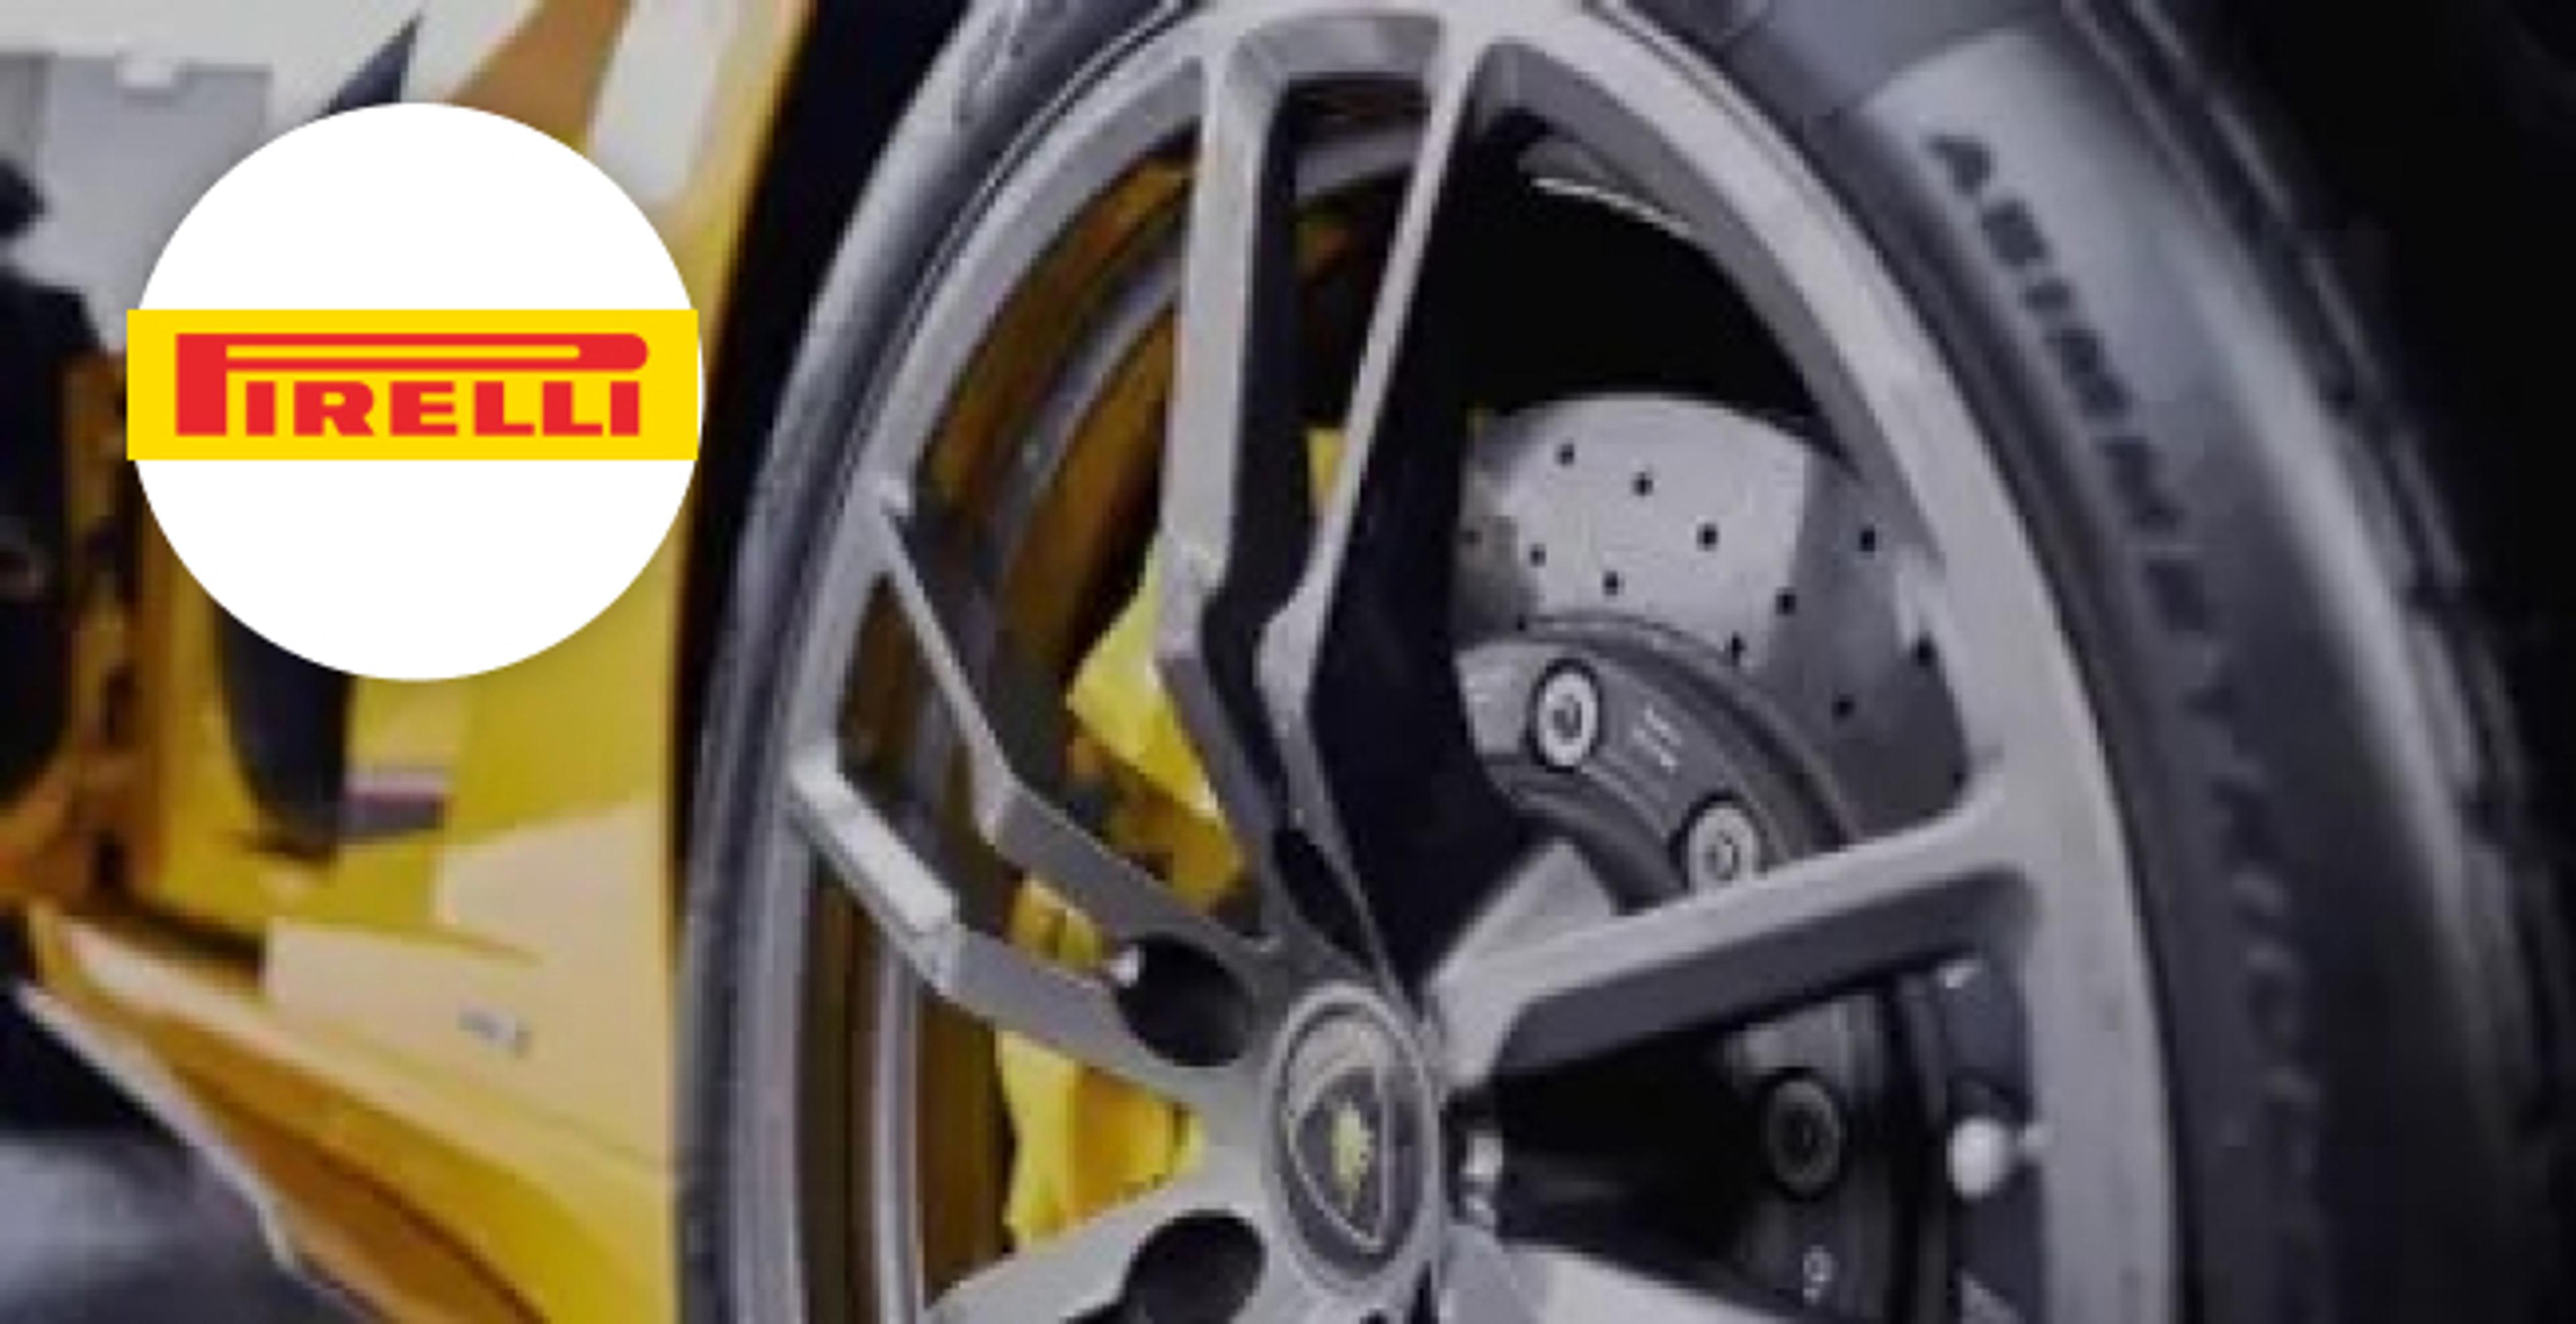 Save $90 when you purchase 4 eligible Pirelli tires!